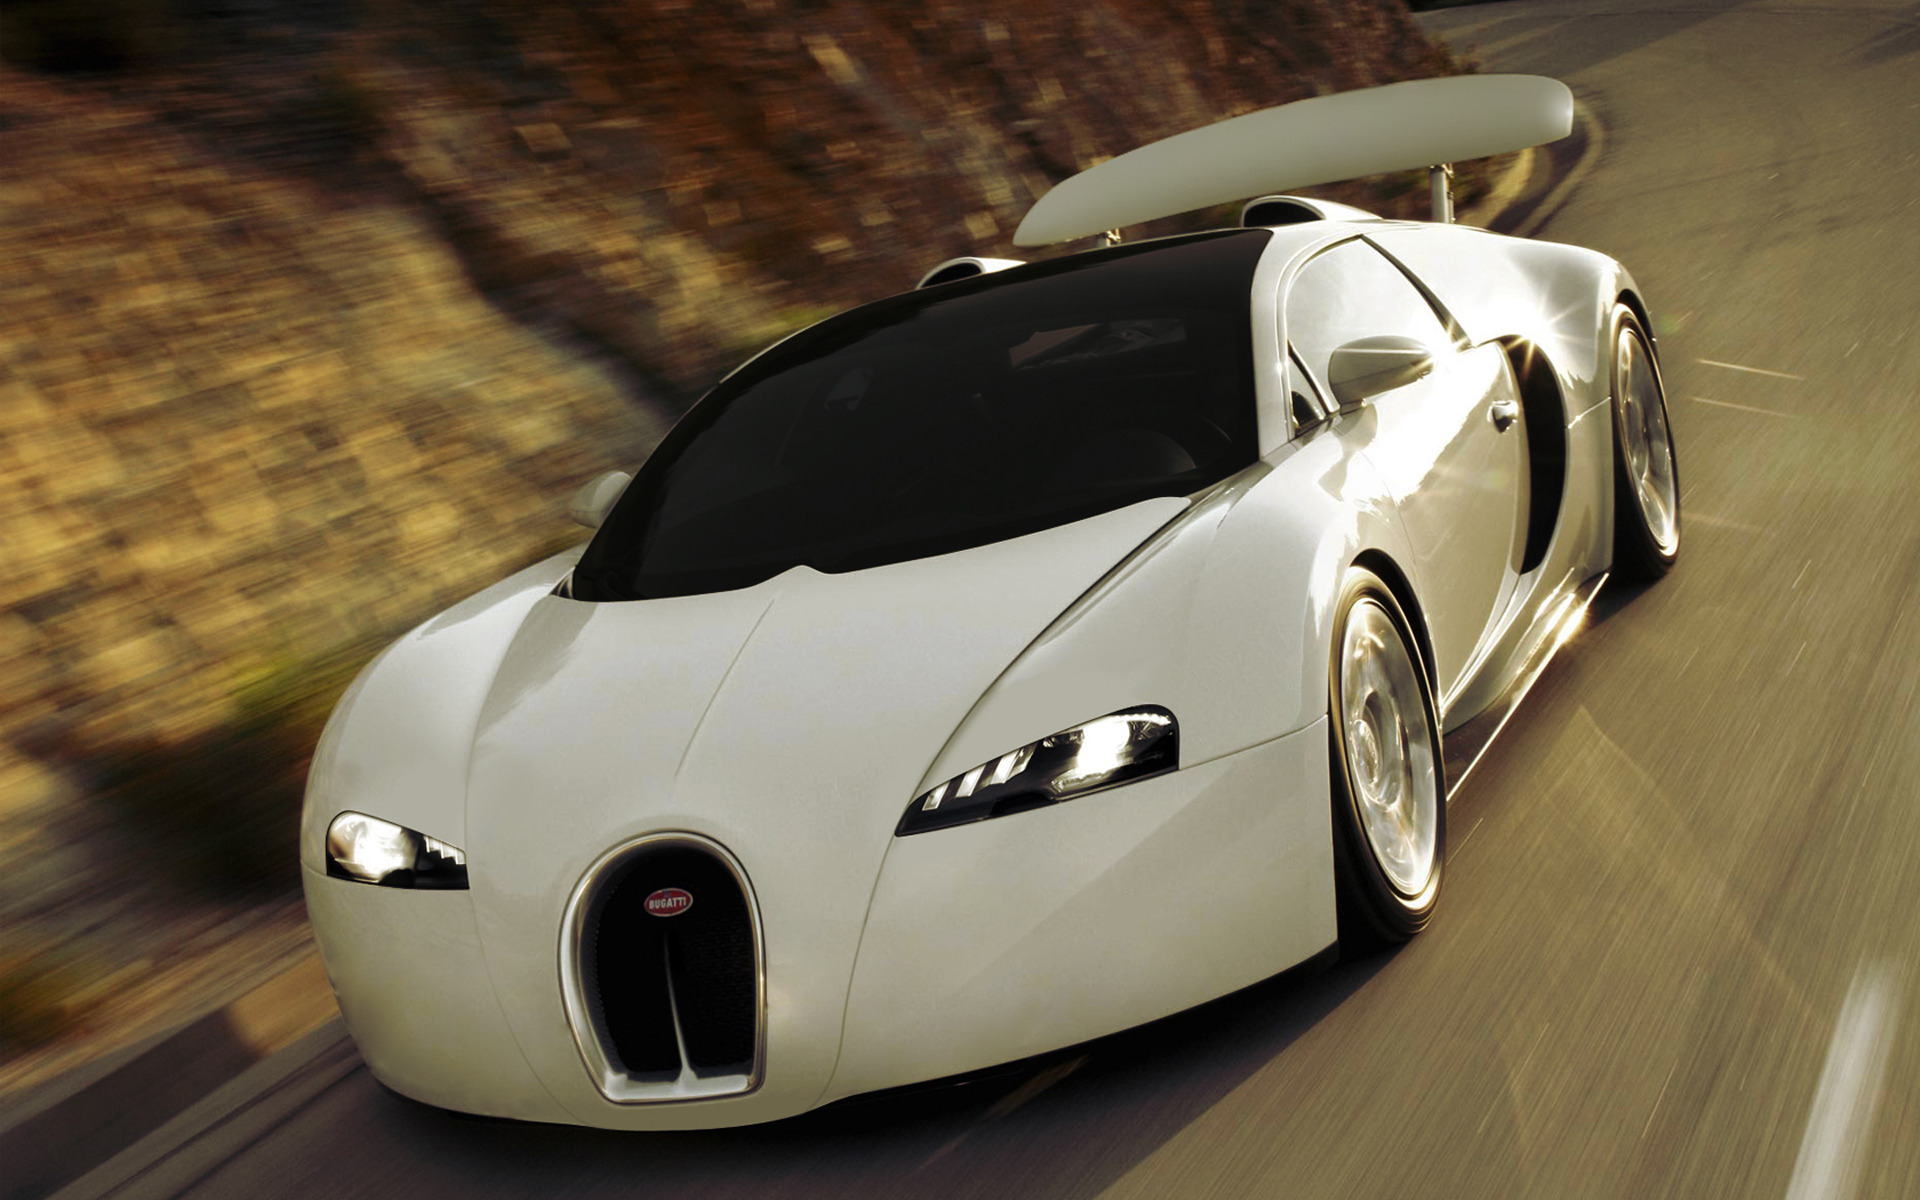 cars hd wallpapers for laptop,land vehicle,vehicle,car,sports car,supercar